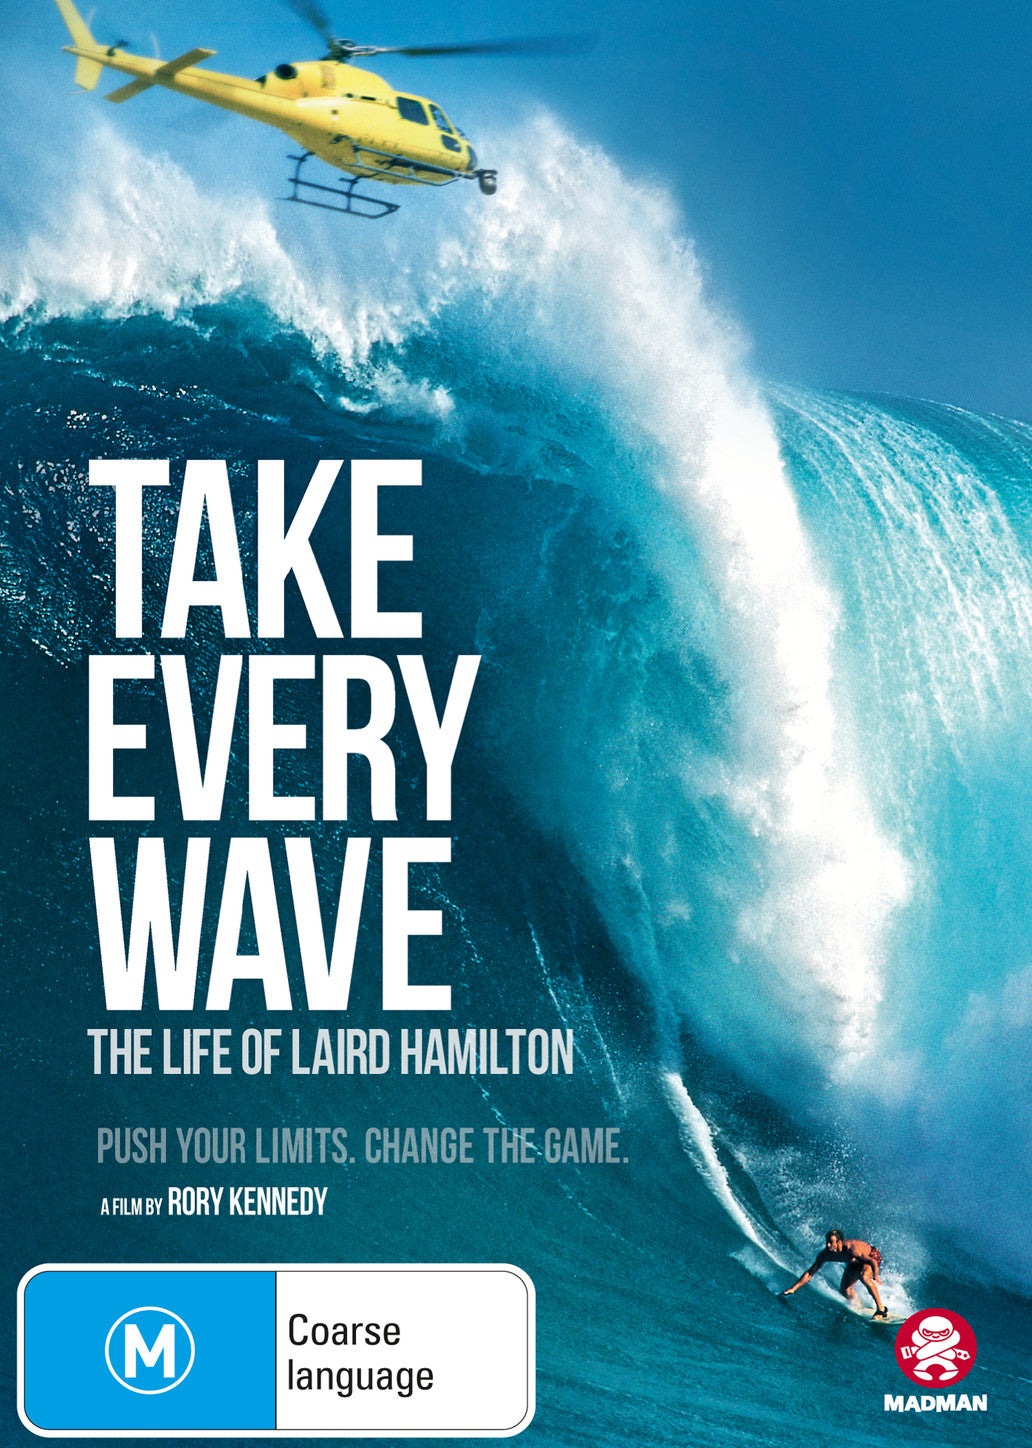 TAKE EVERY WAVE: THE LIFE OF LAIRD HAMILTON